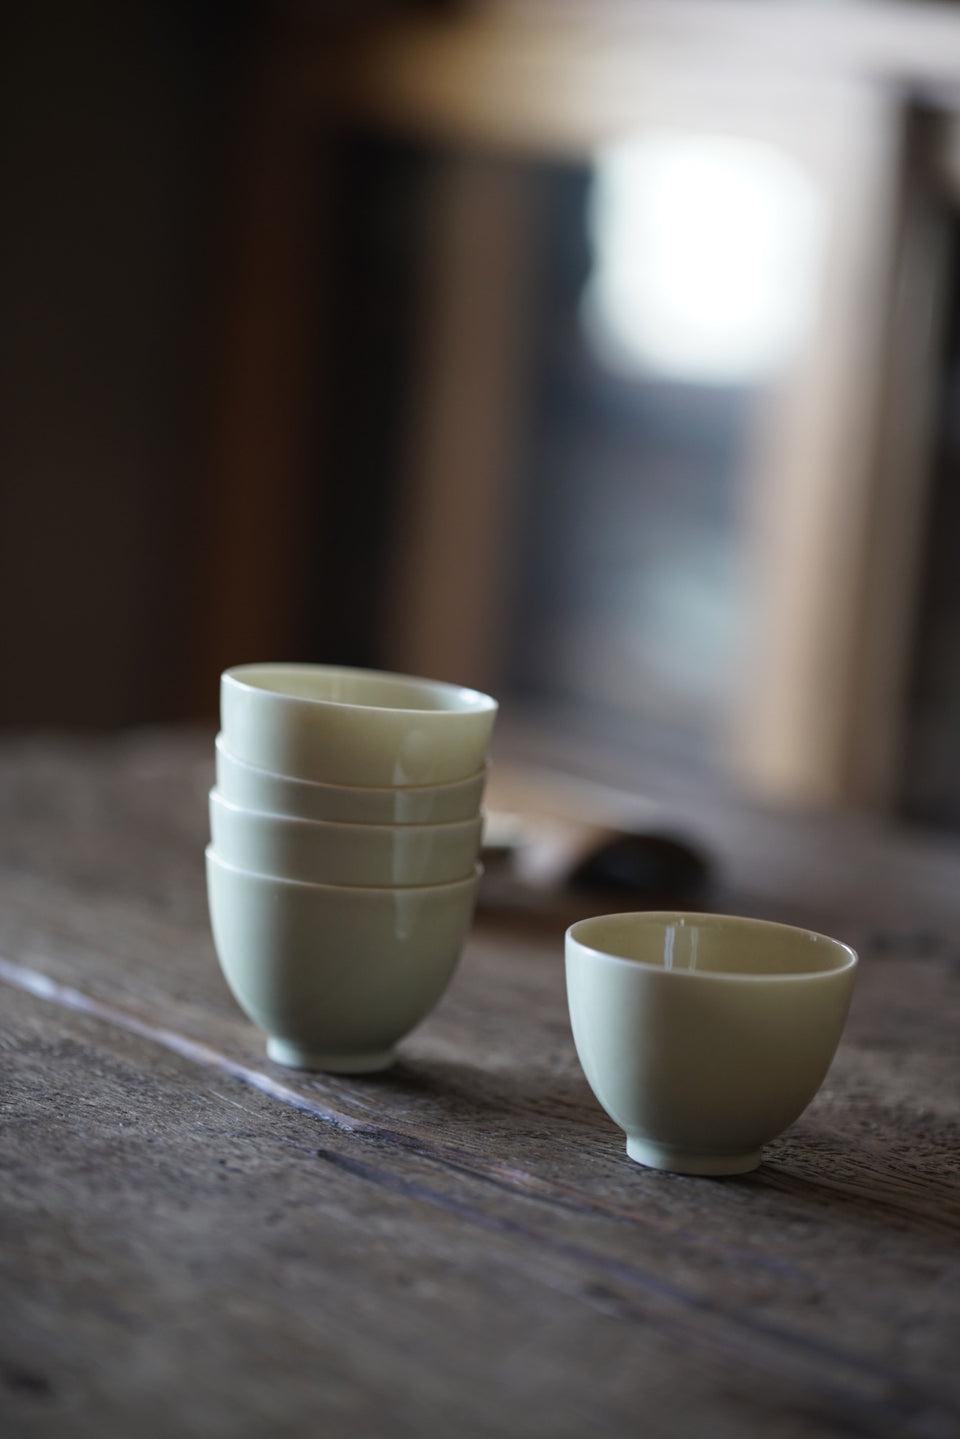 Gongfu teacups - off-white, multiple styles